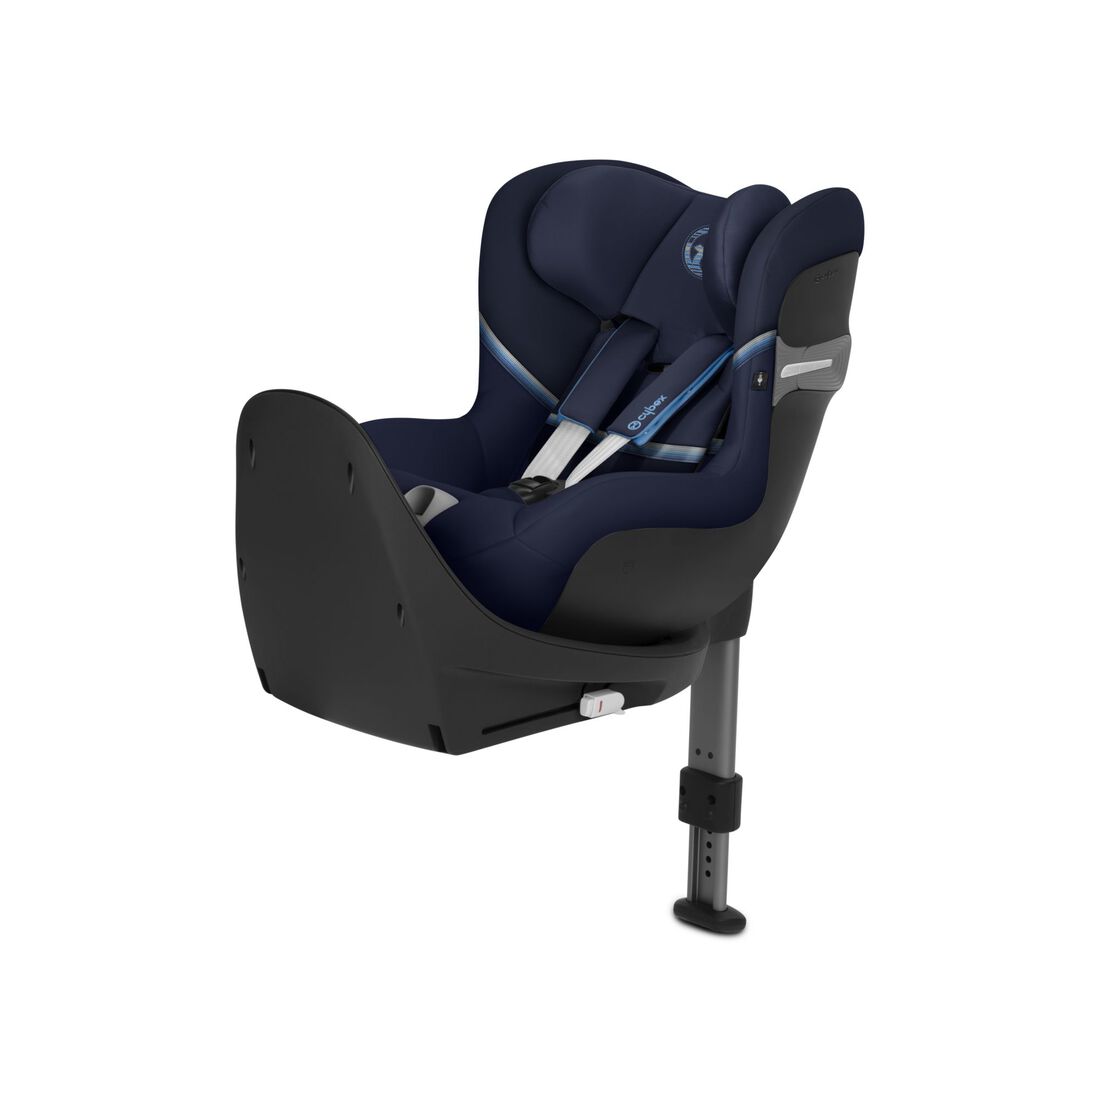 CYBEX Sirona S i-Size - Navy Blue in Navy Blue large image number 1